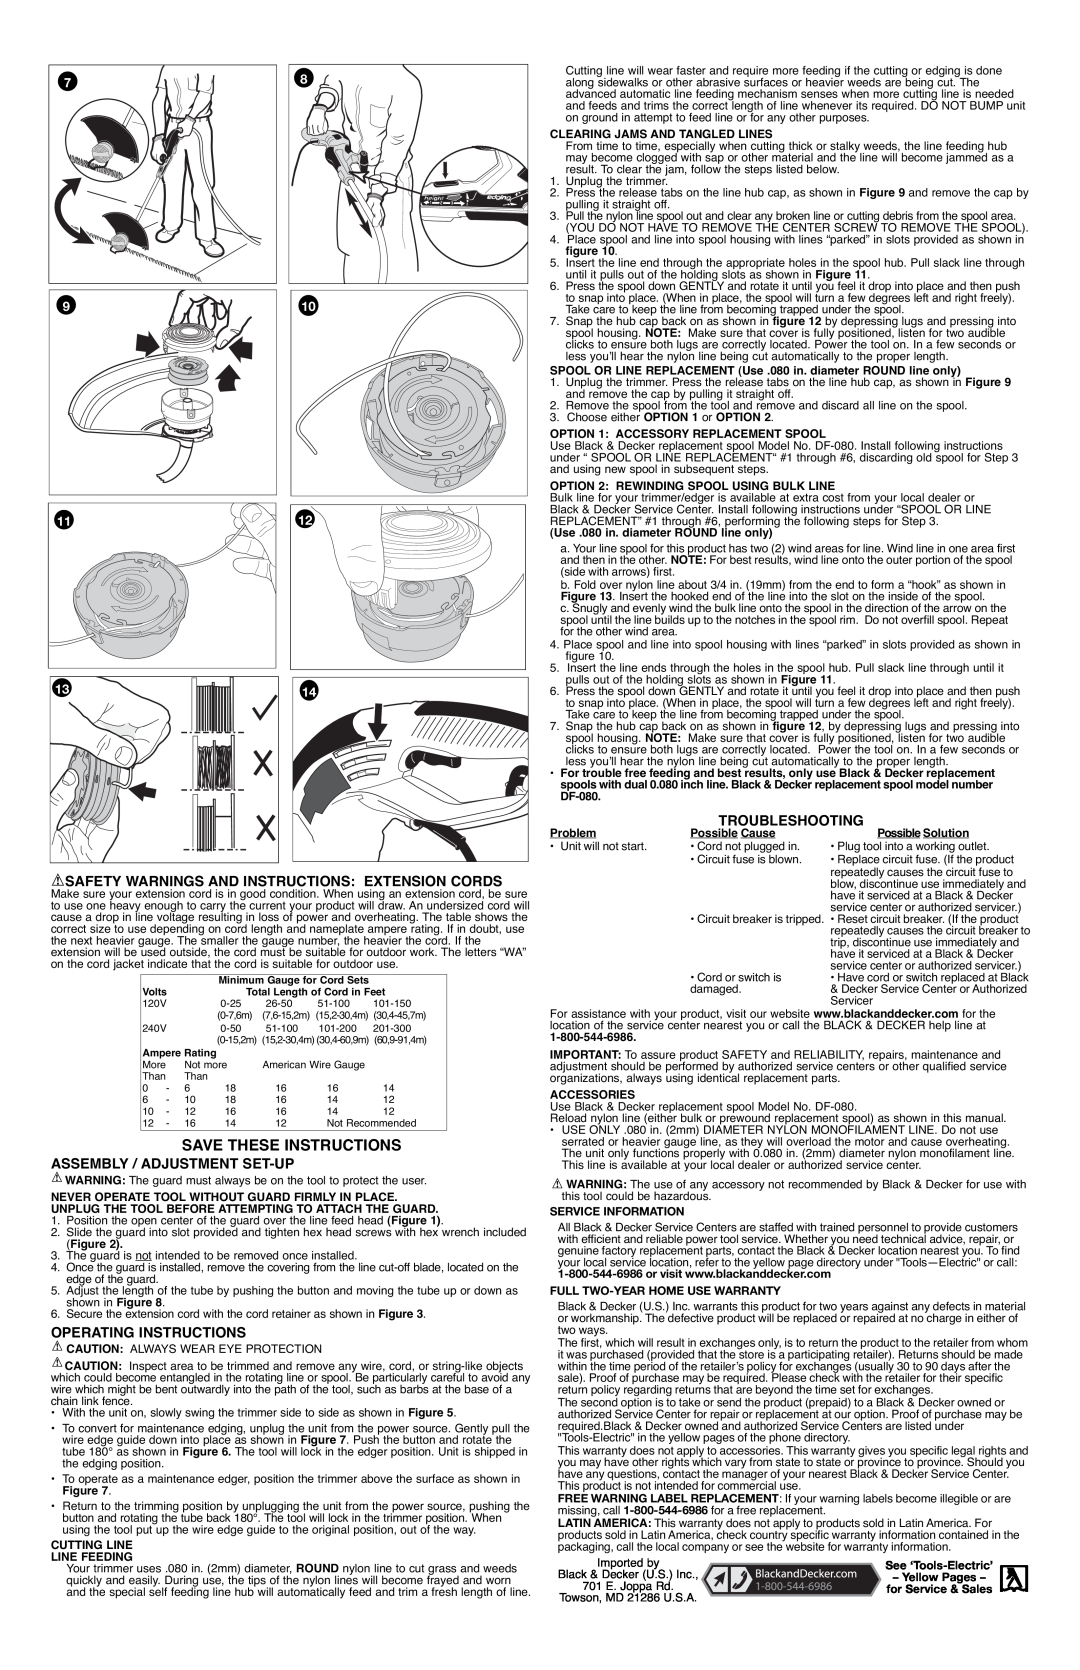 Black & Decker 311066C Safety Warnings And Instructions Extension Cords, Assembly / Adjustment Set-Up, Troubleshooting 